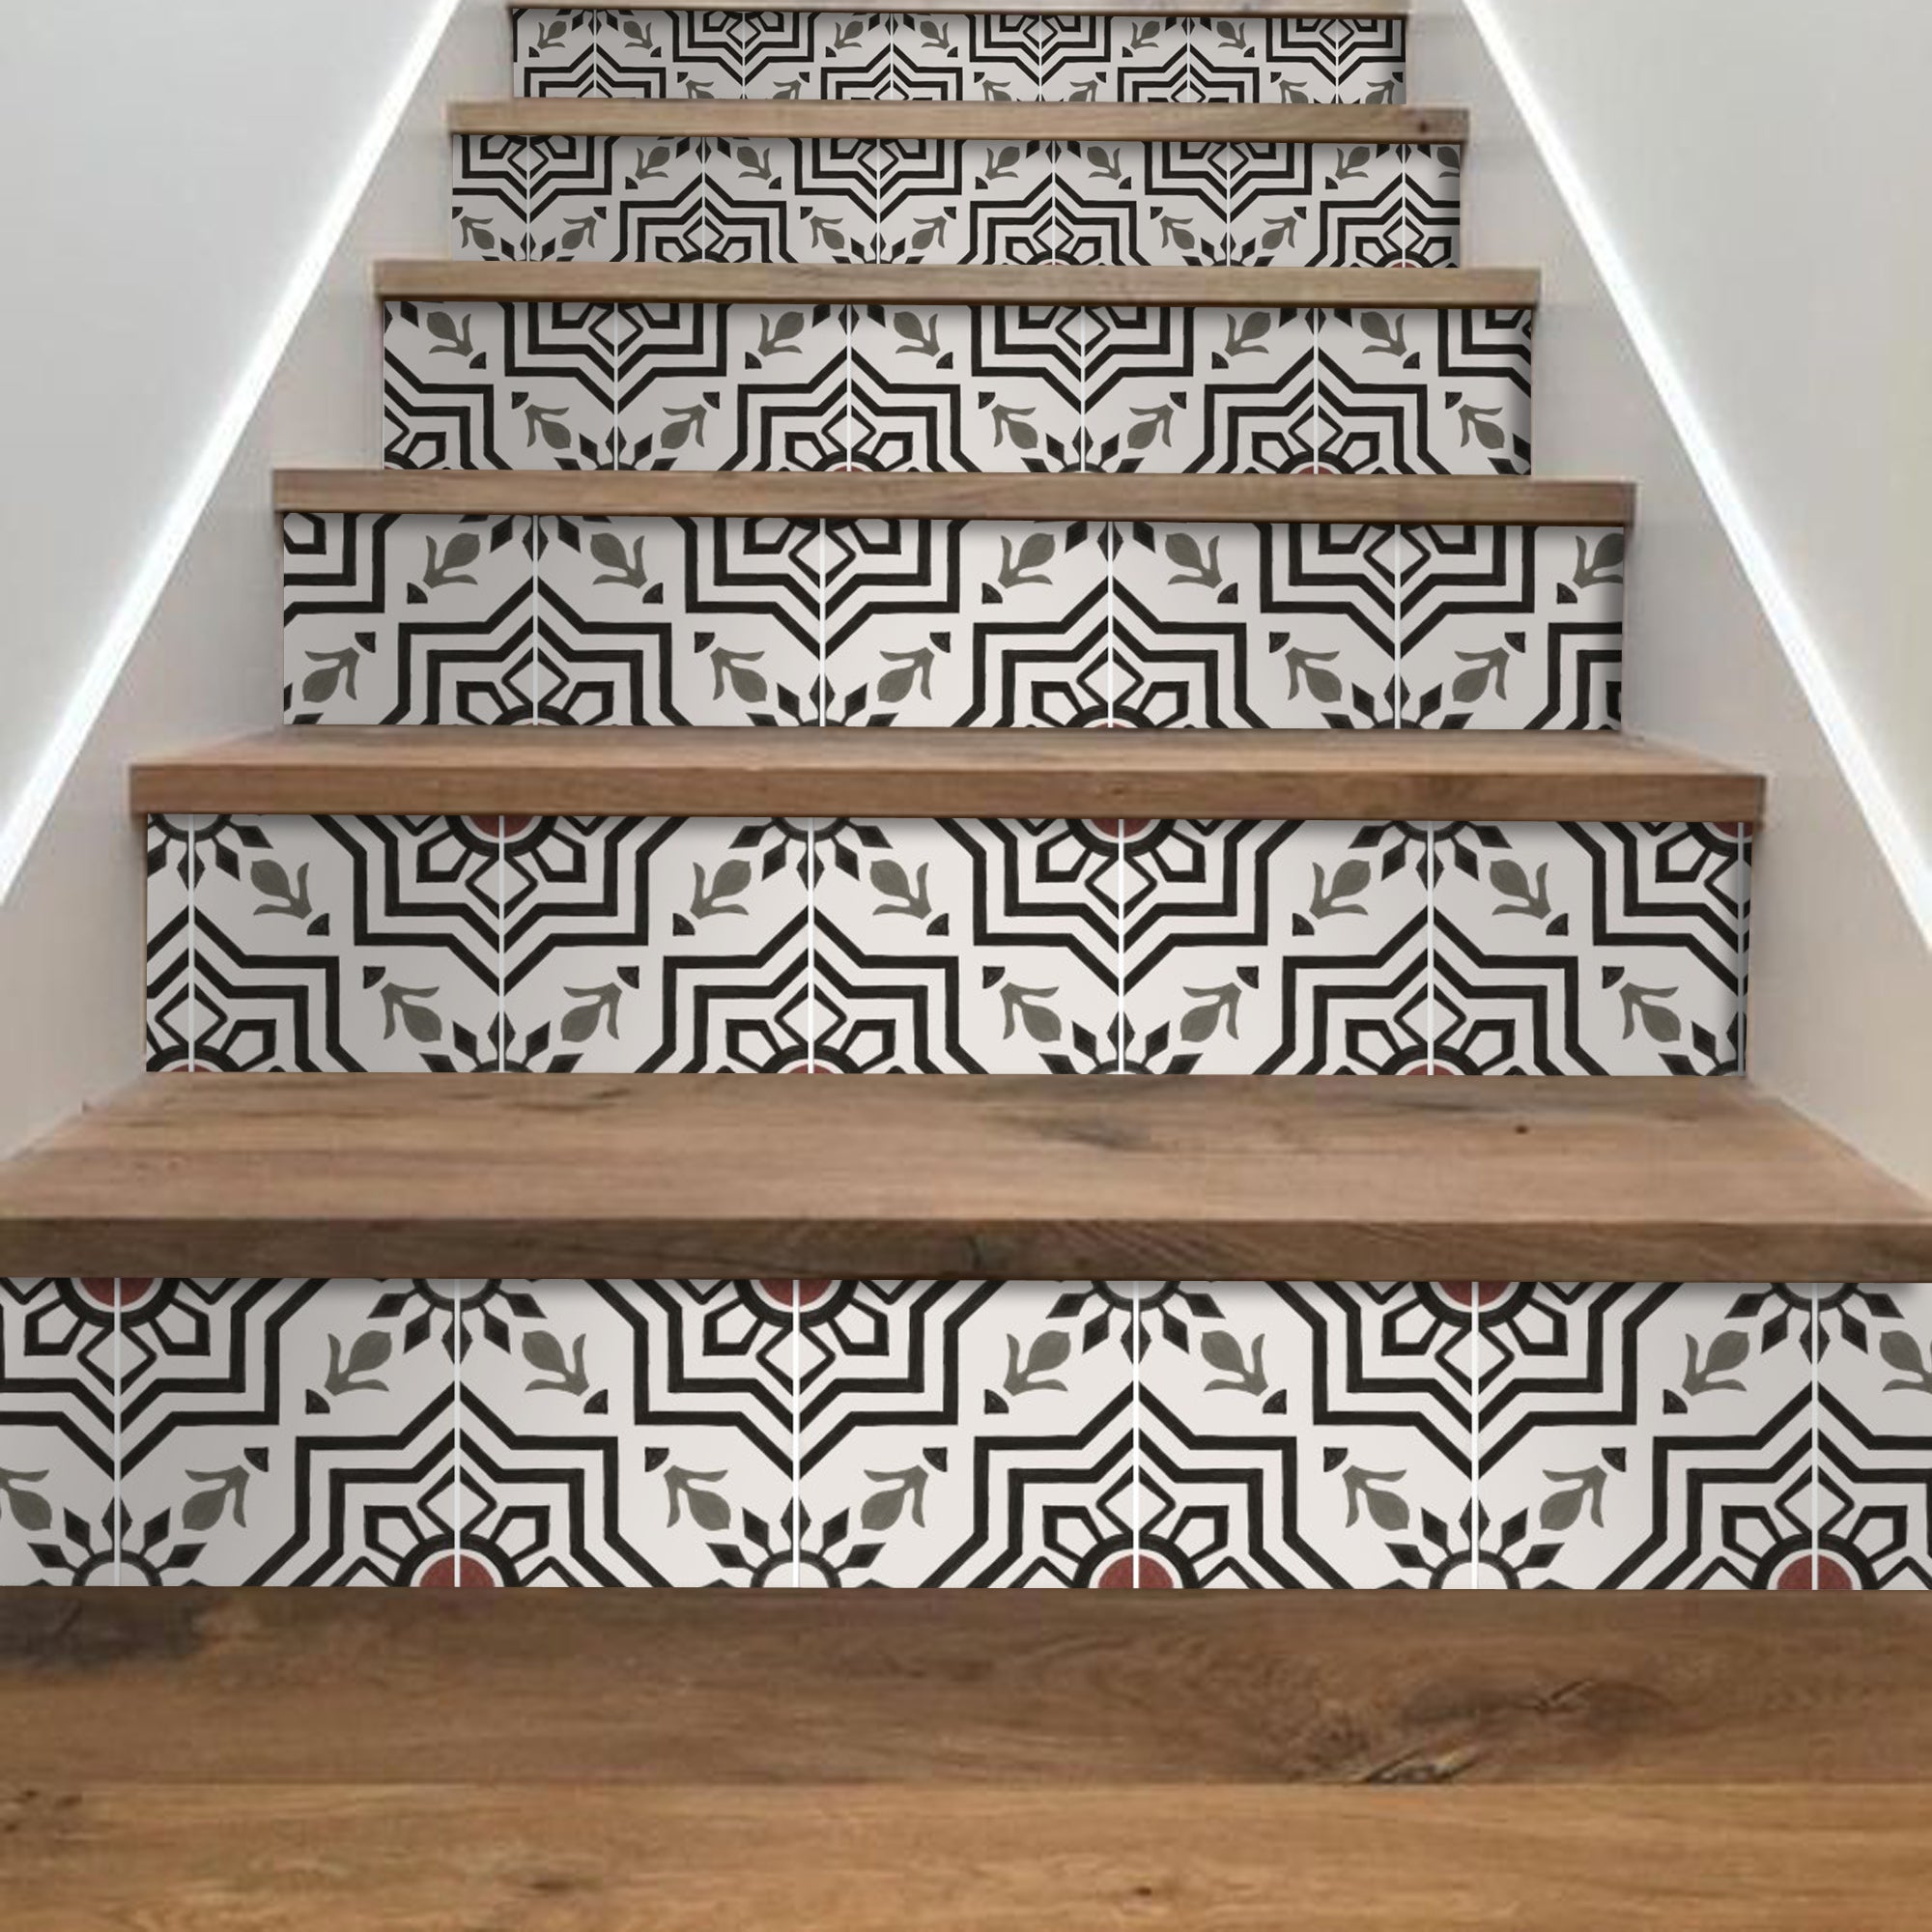 Marrakech Mix Stair Risers in Black and White